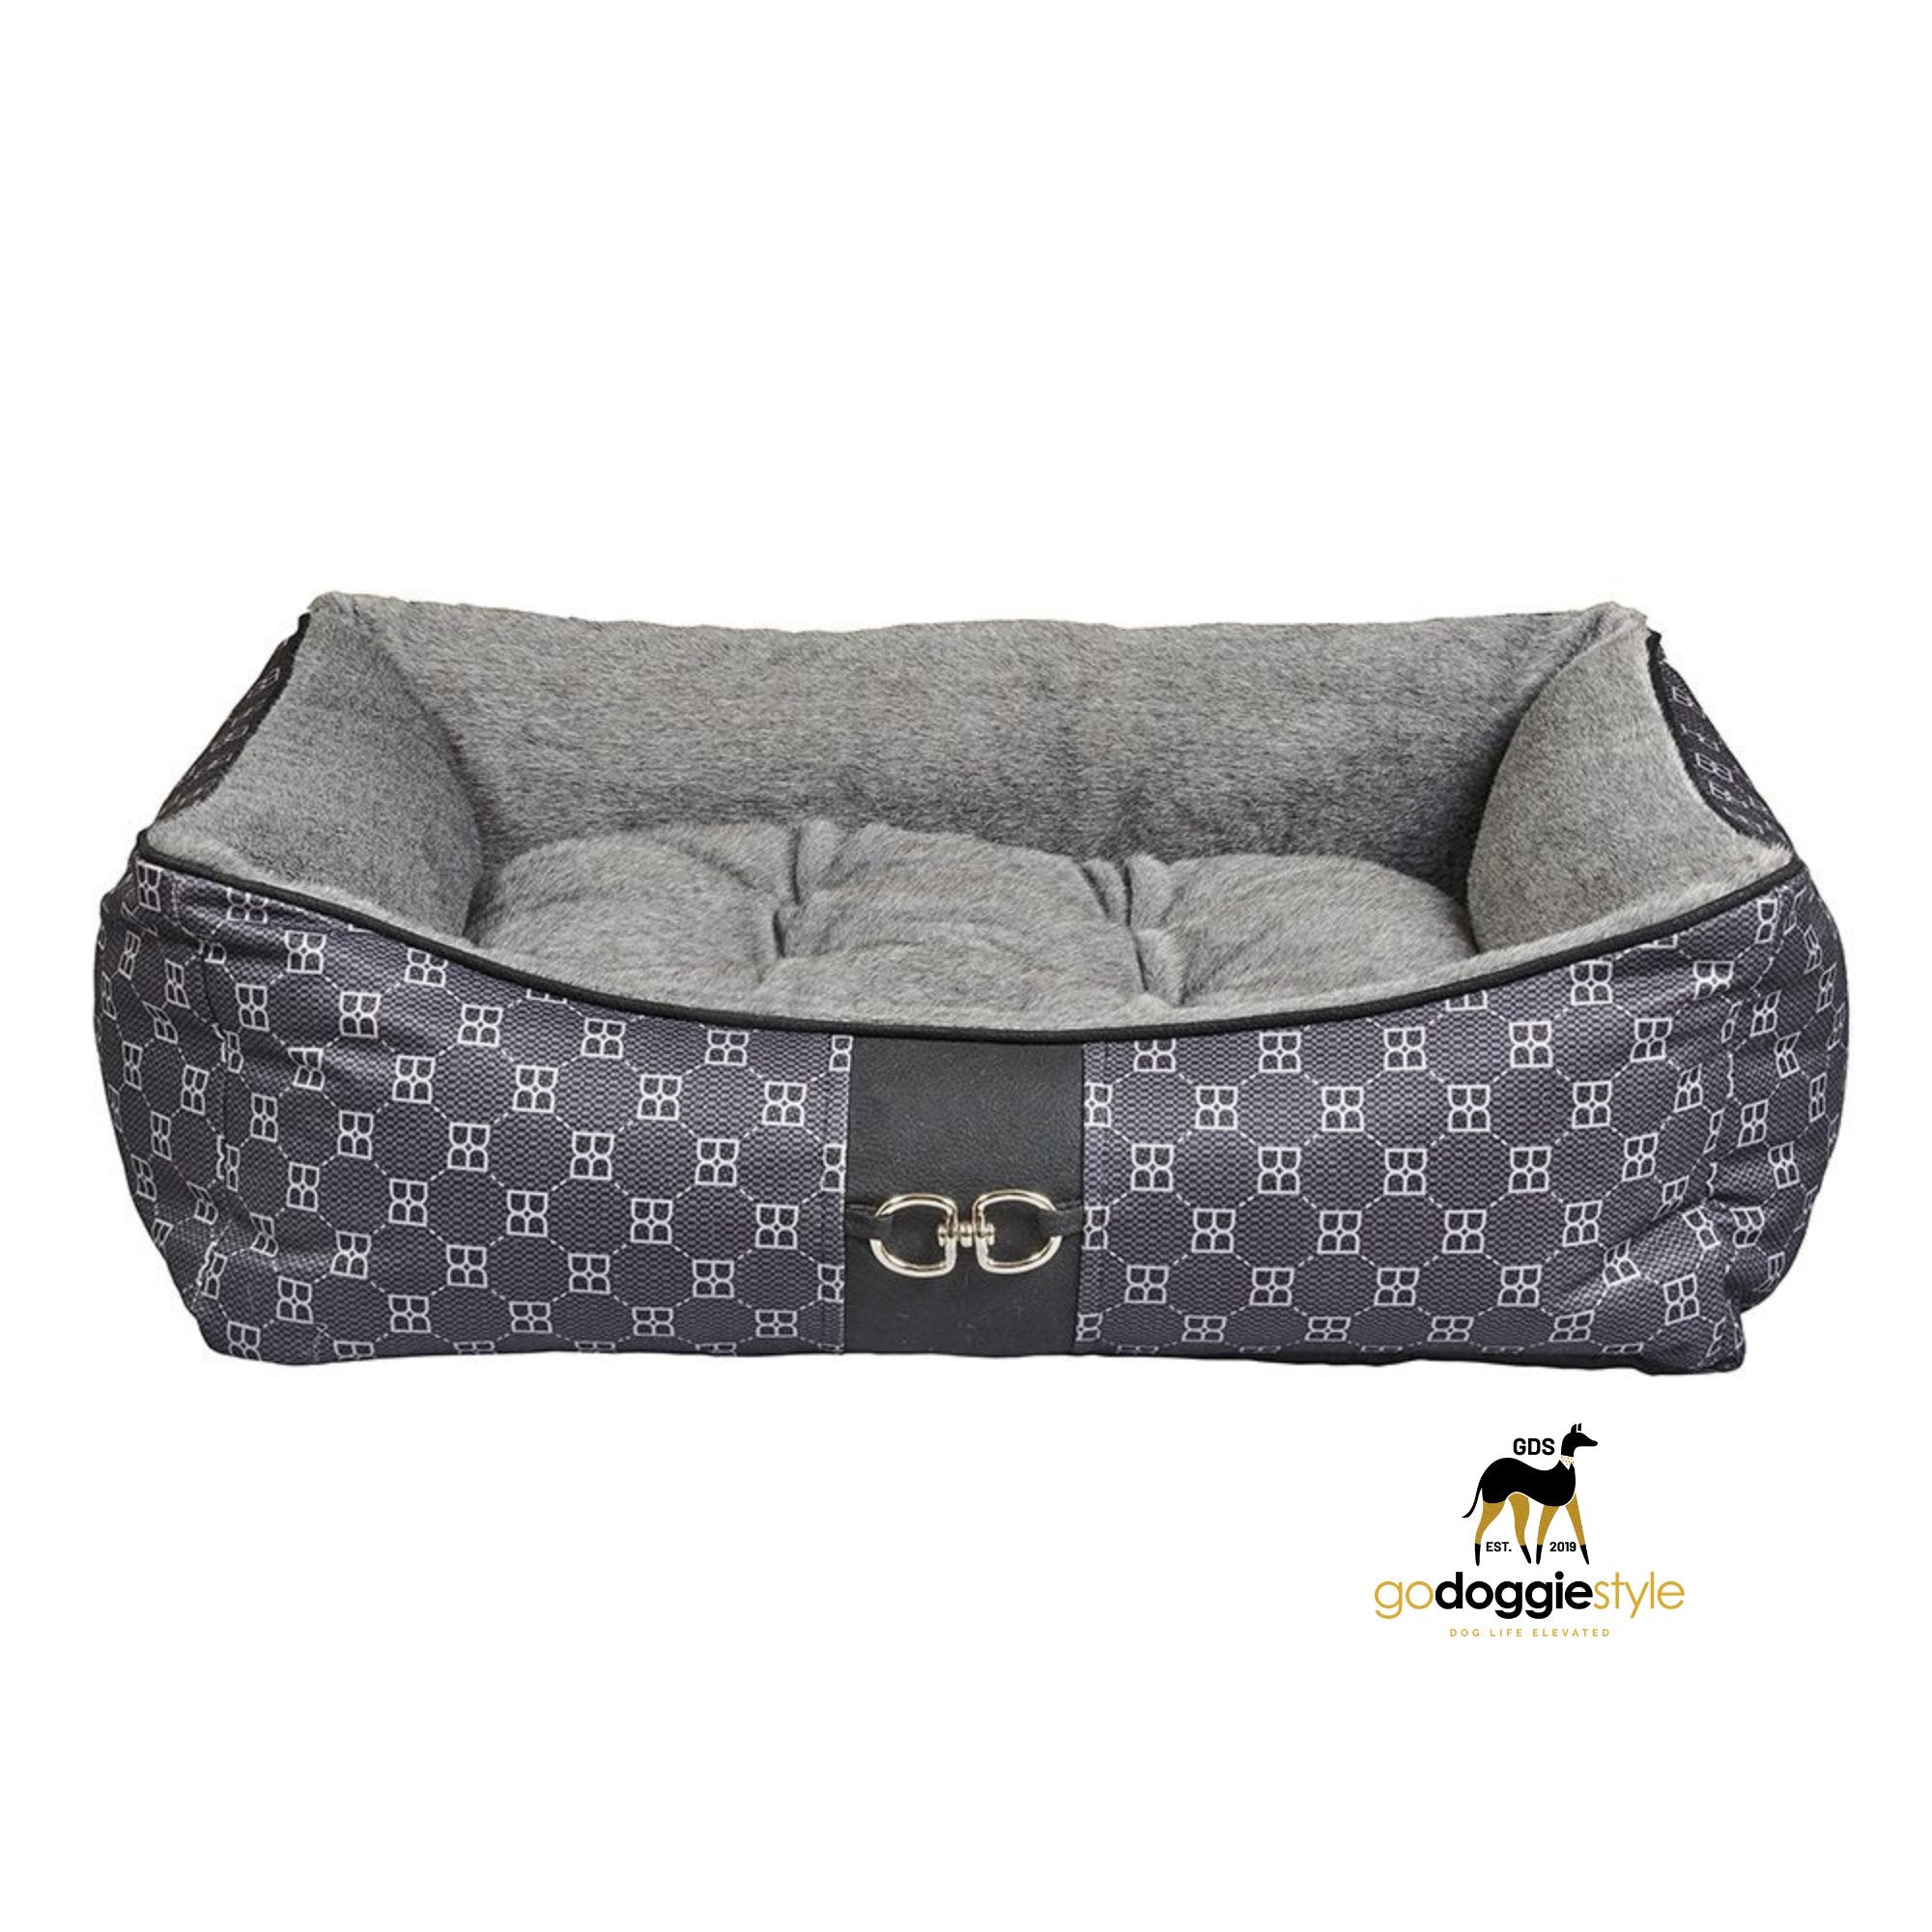 Bowsers Carry-All Dog Carrier - Signature Noir